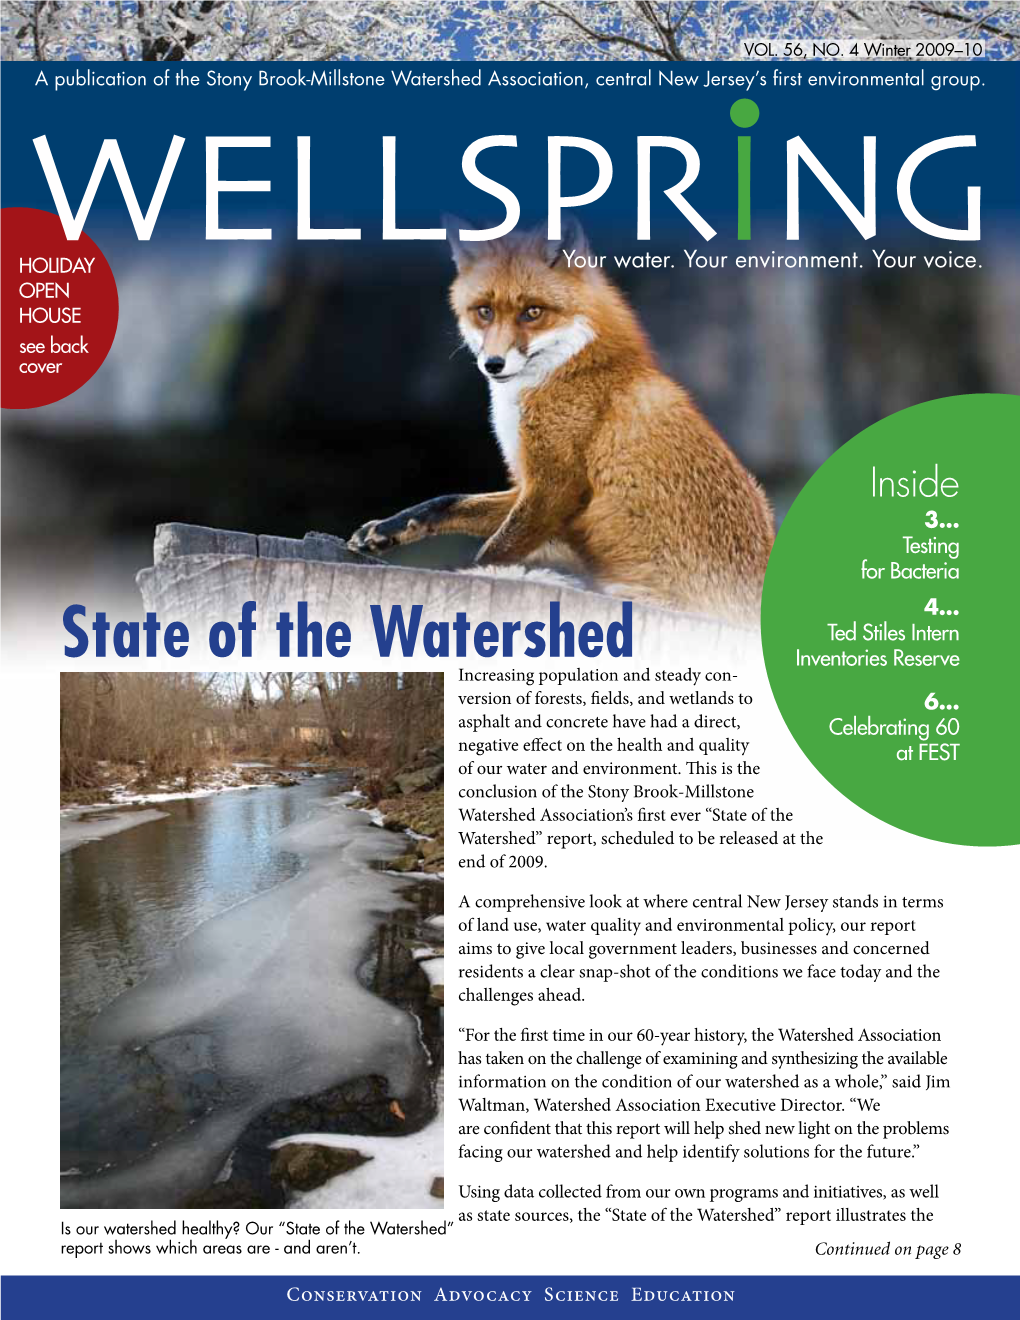 State of the Watershed Inventories Reserve Increasing Population and Steady Con- Version of Forests, Fields, and Wetlands to 6